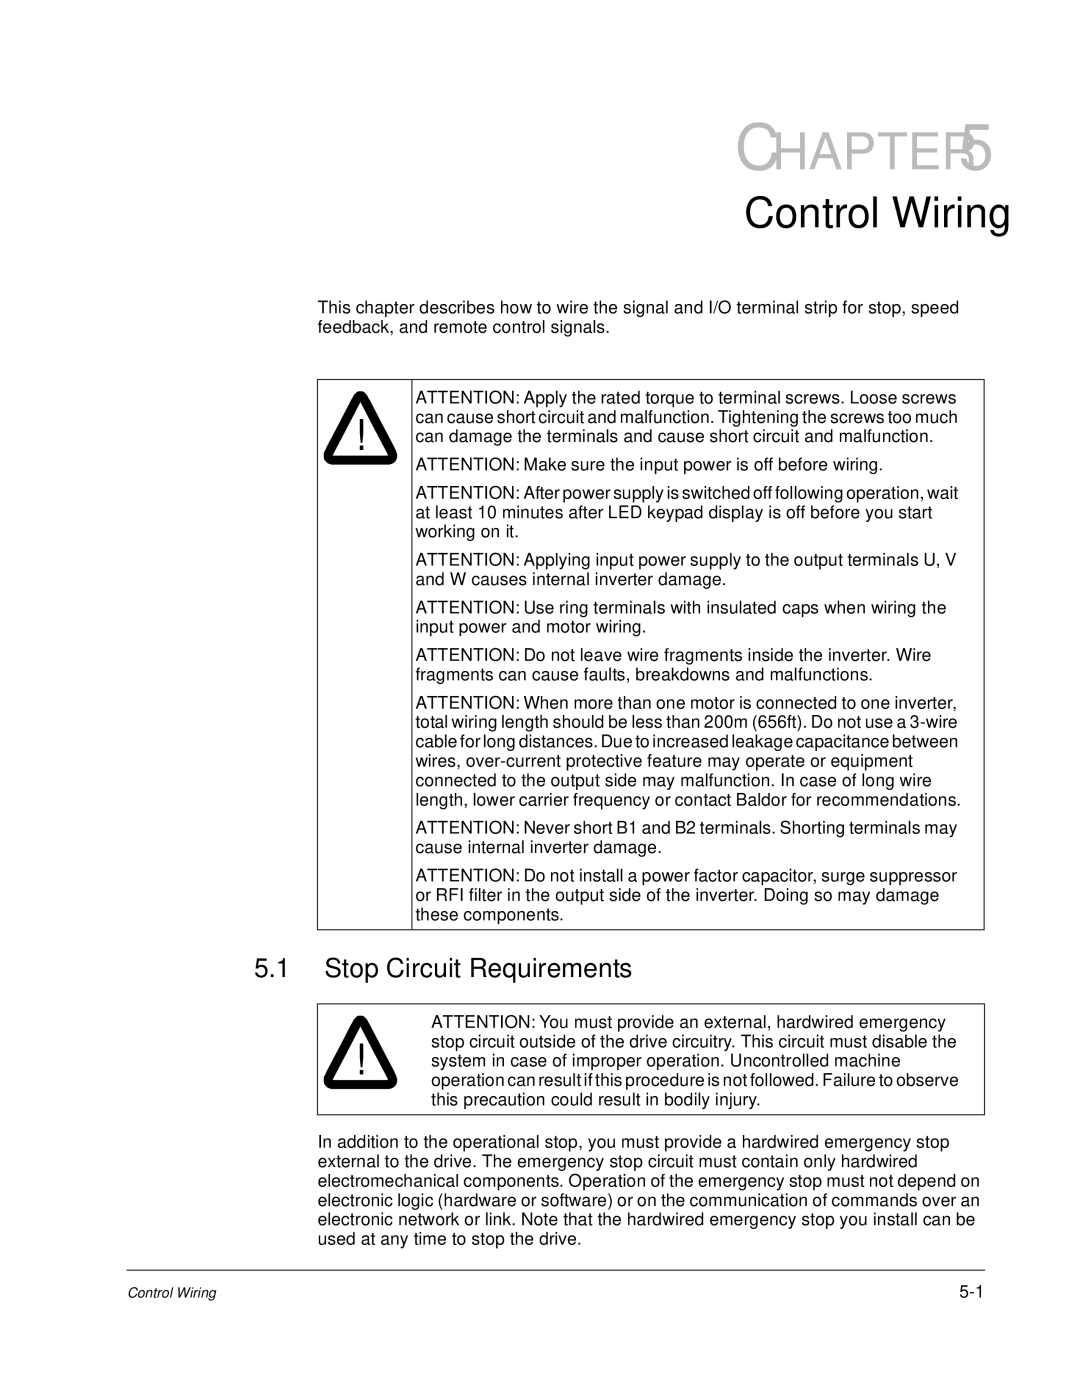 Baldor VS1MD instruction manual Control Wiring, Stop Circuit Requirements 